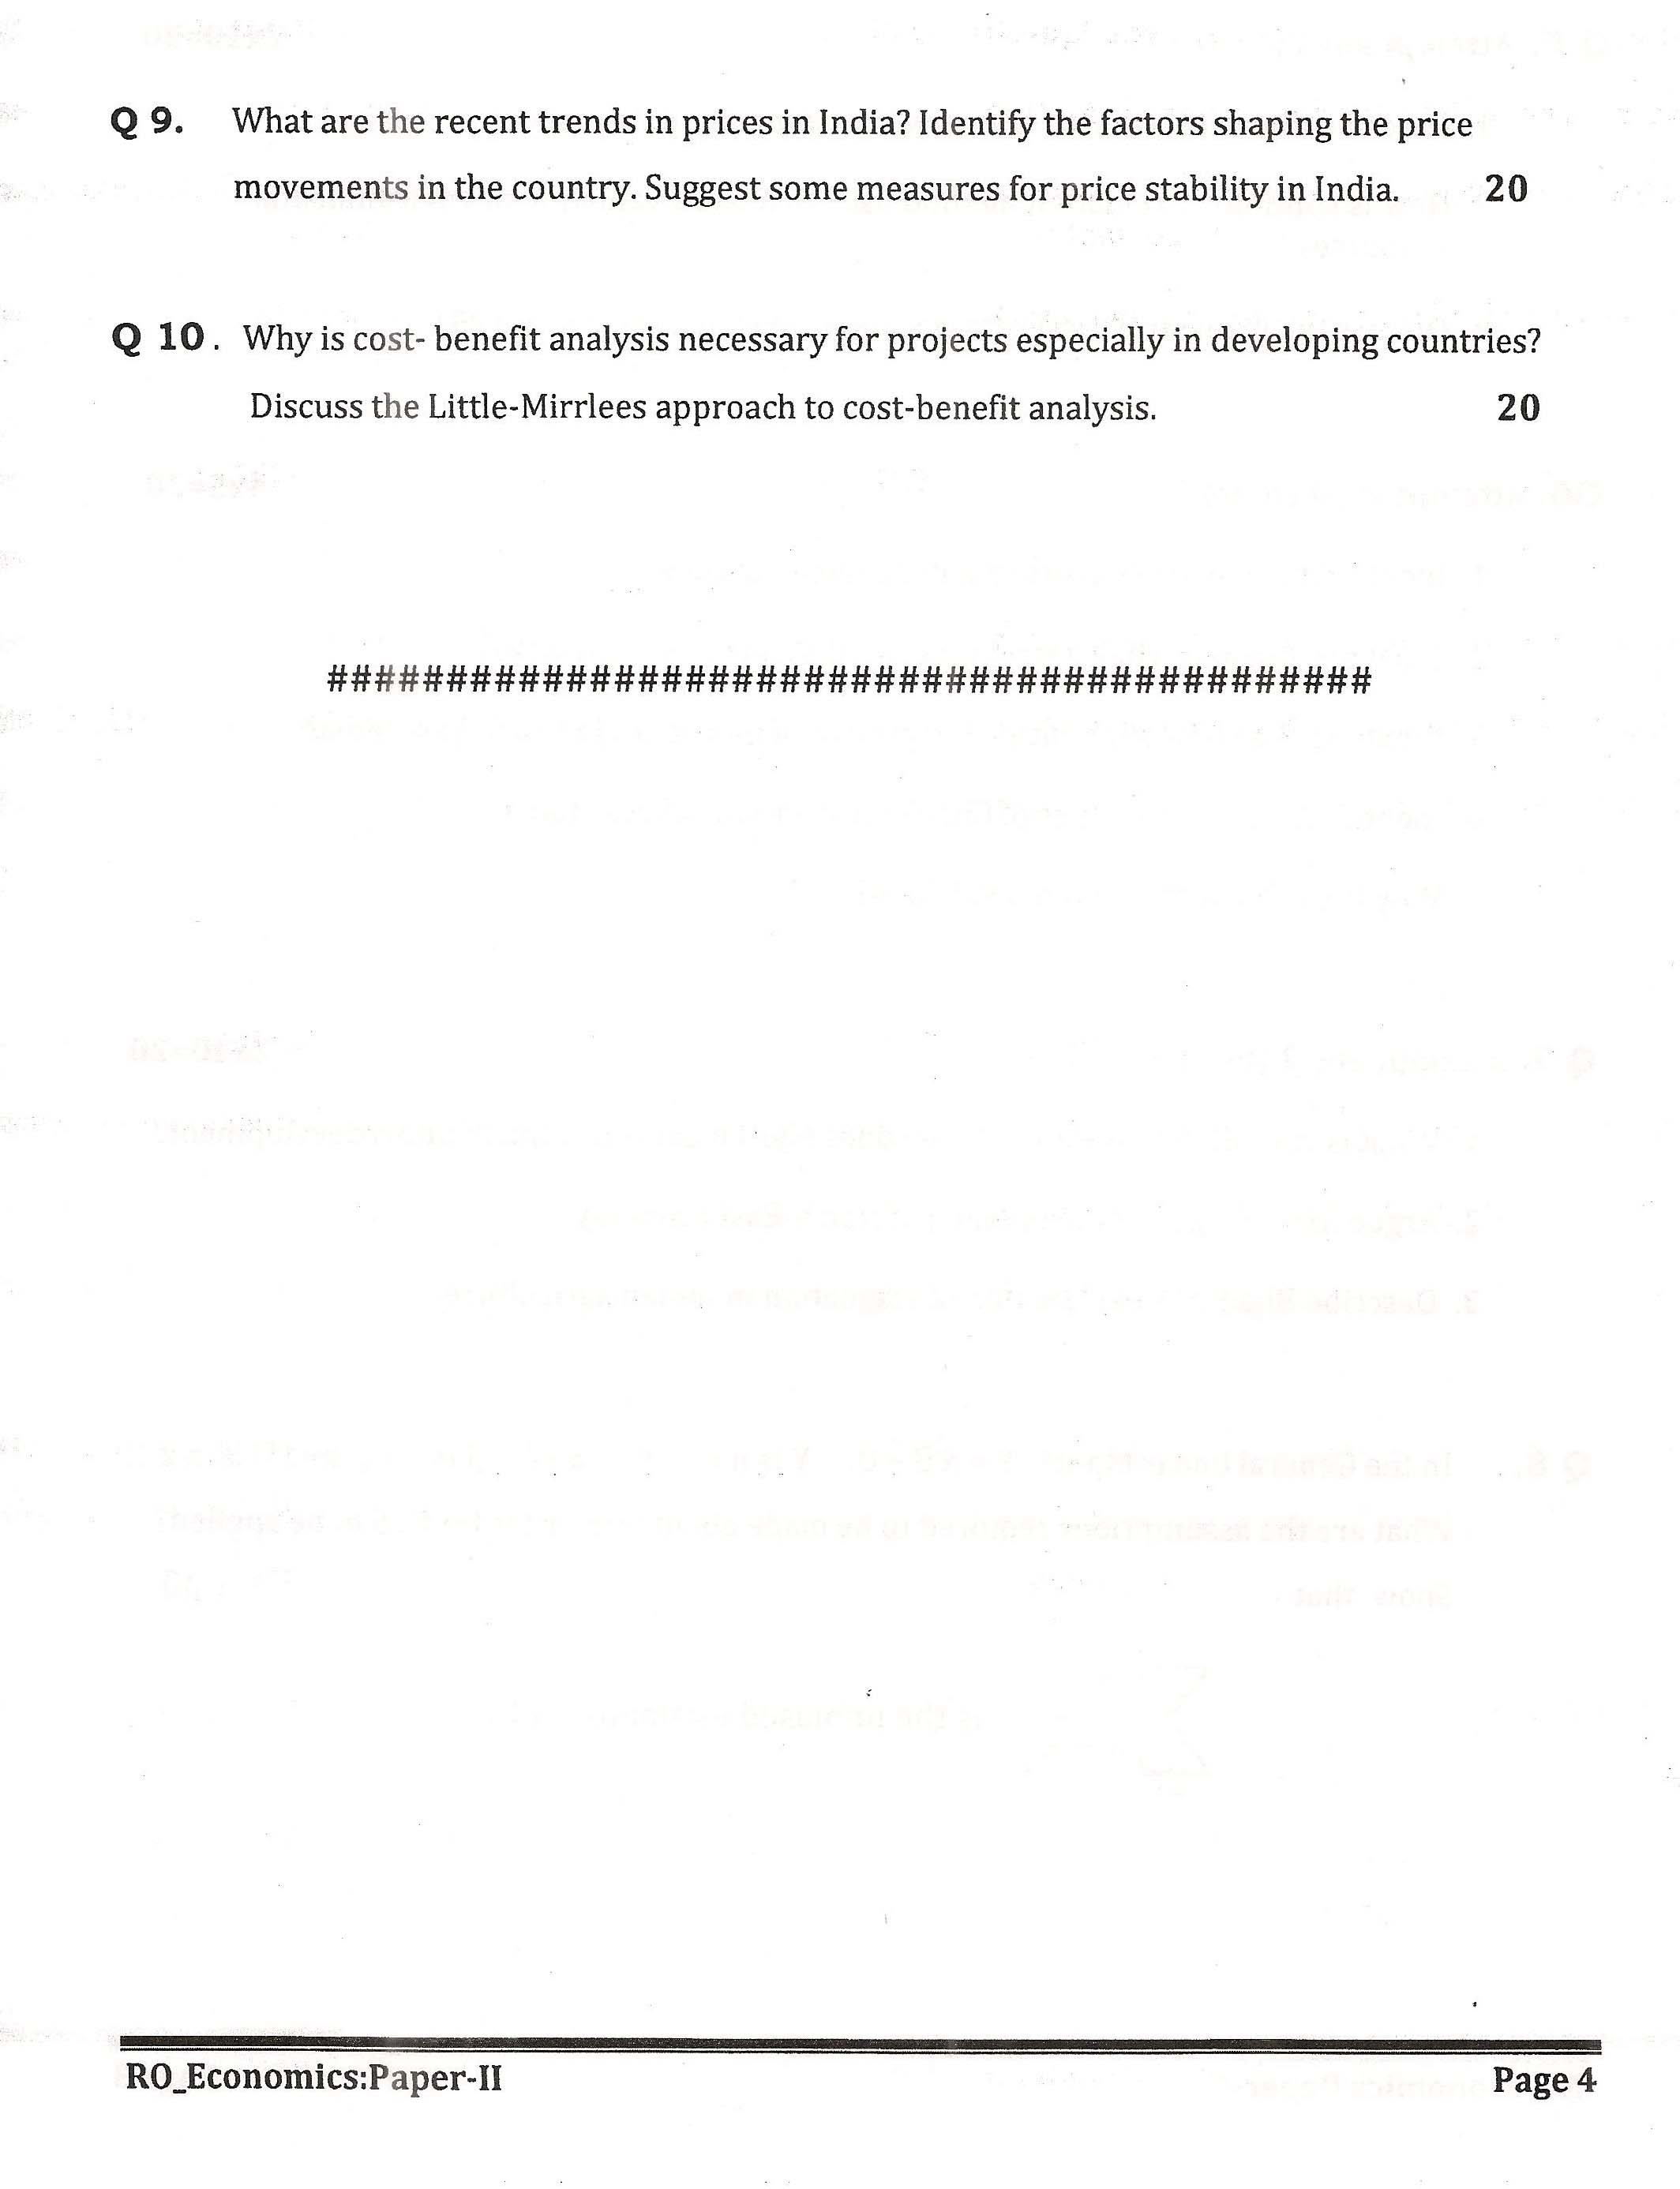 APPSC Research Officer Economics Paper II Exam Question Paper 2014 4